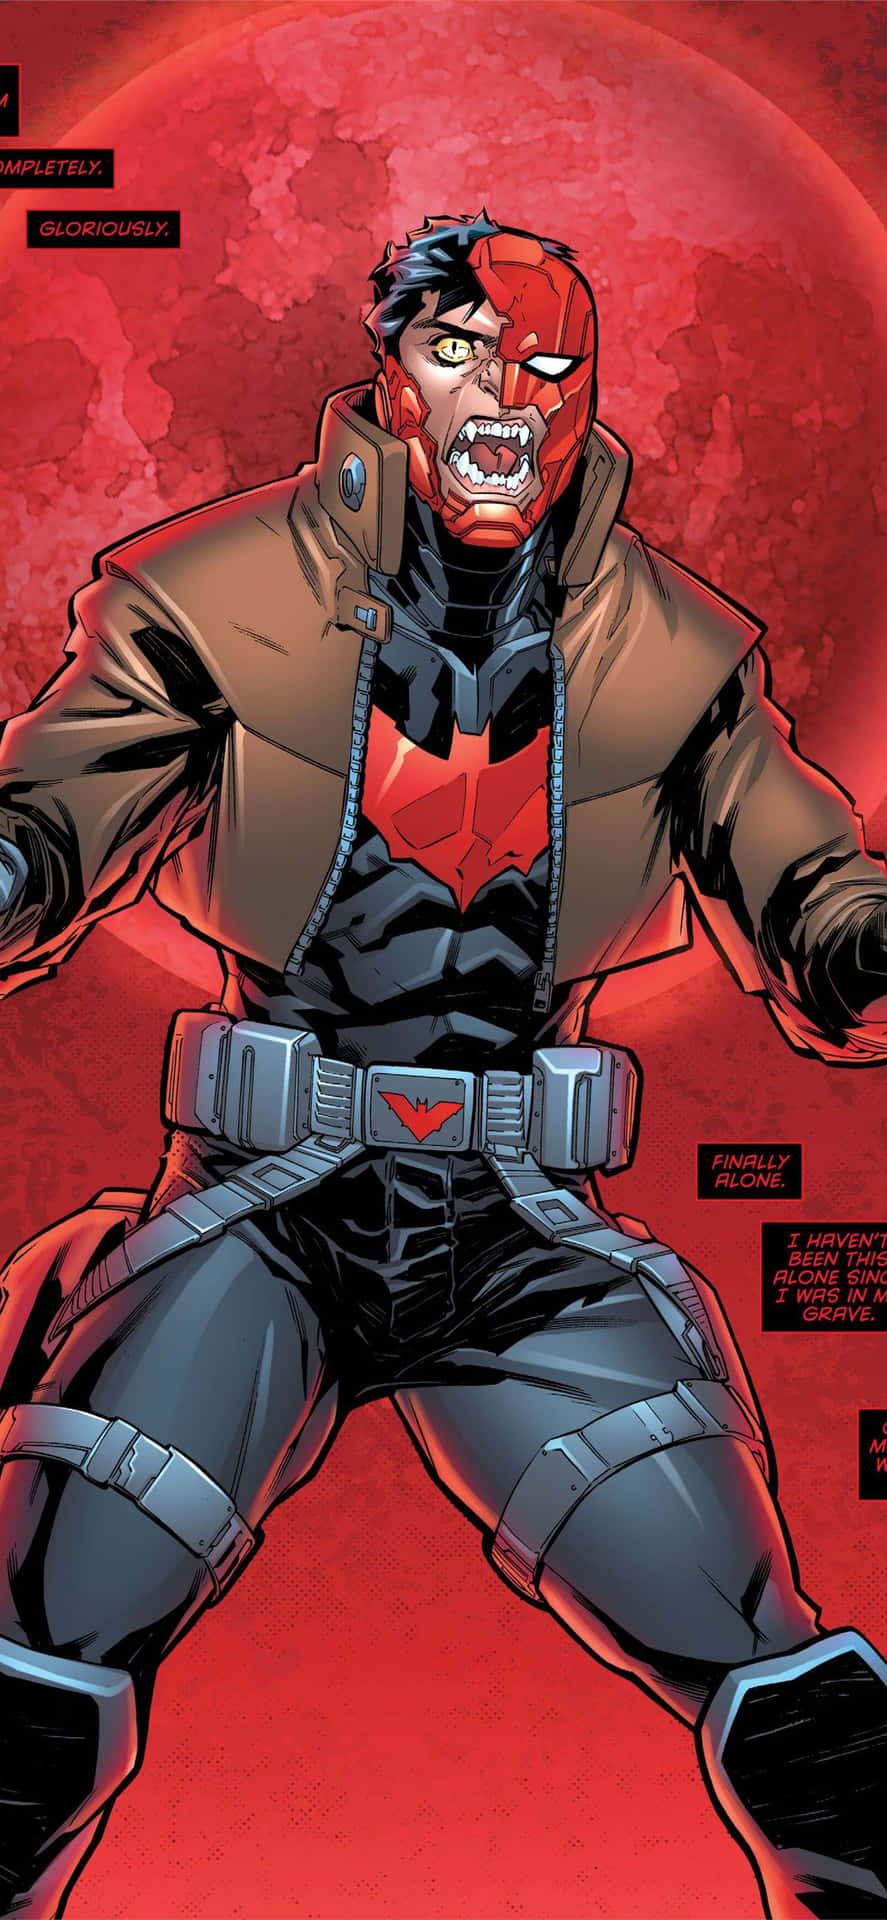 Red Hood dons his iconic black cape